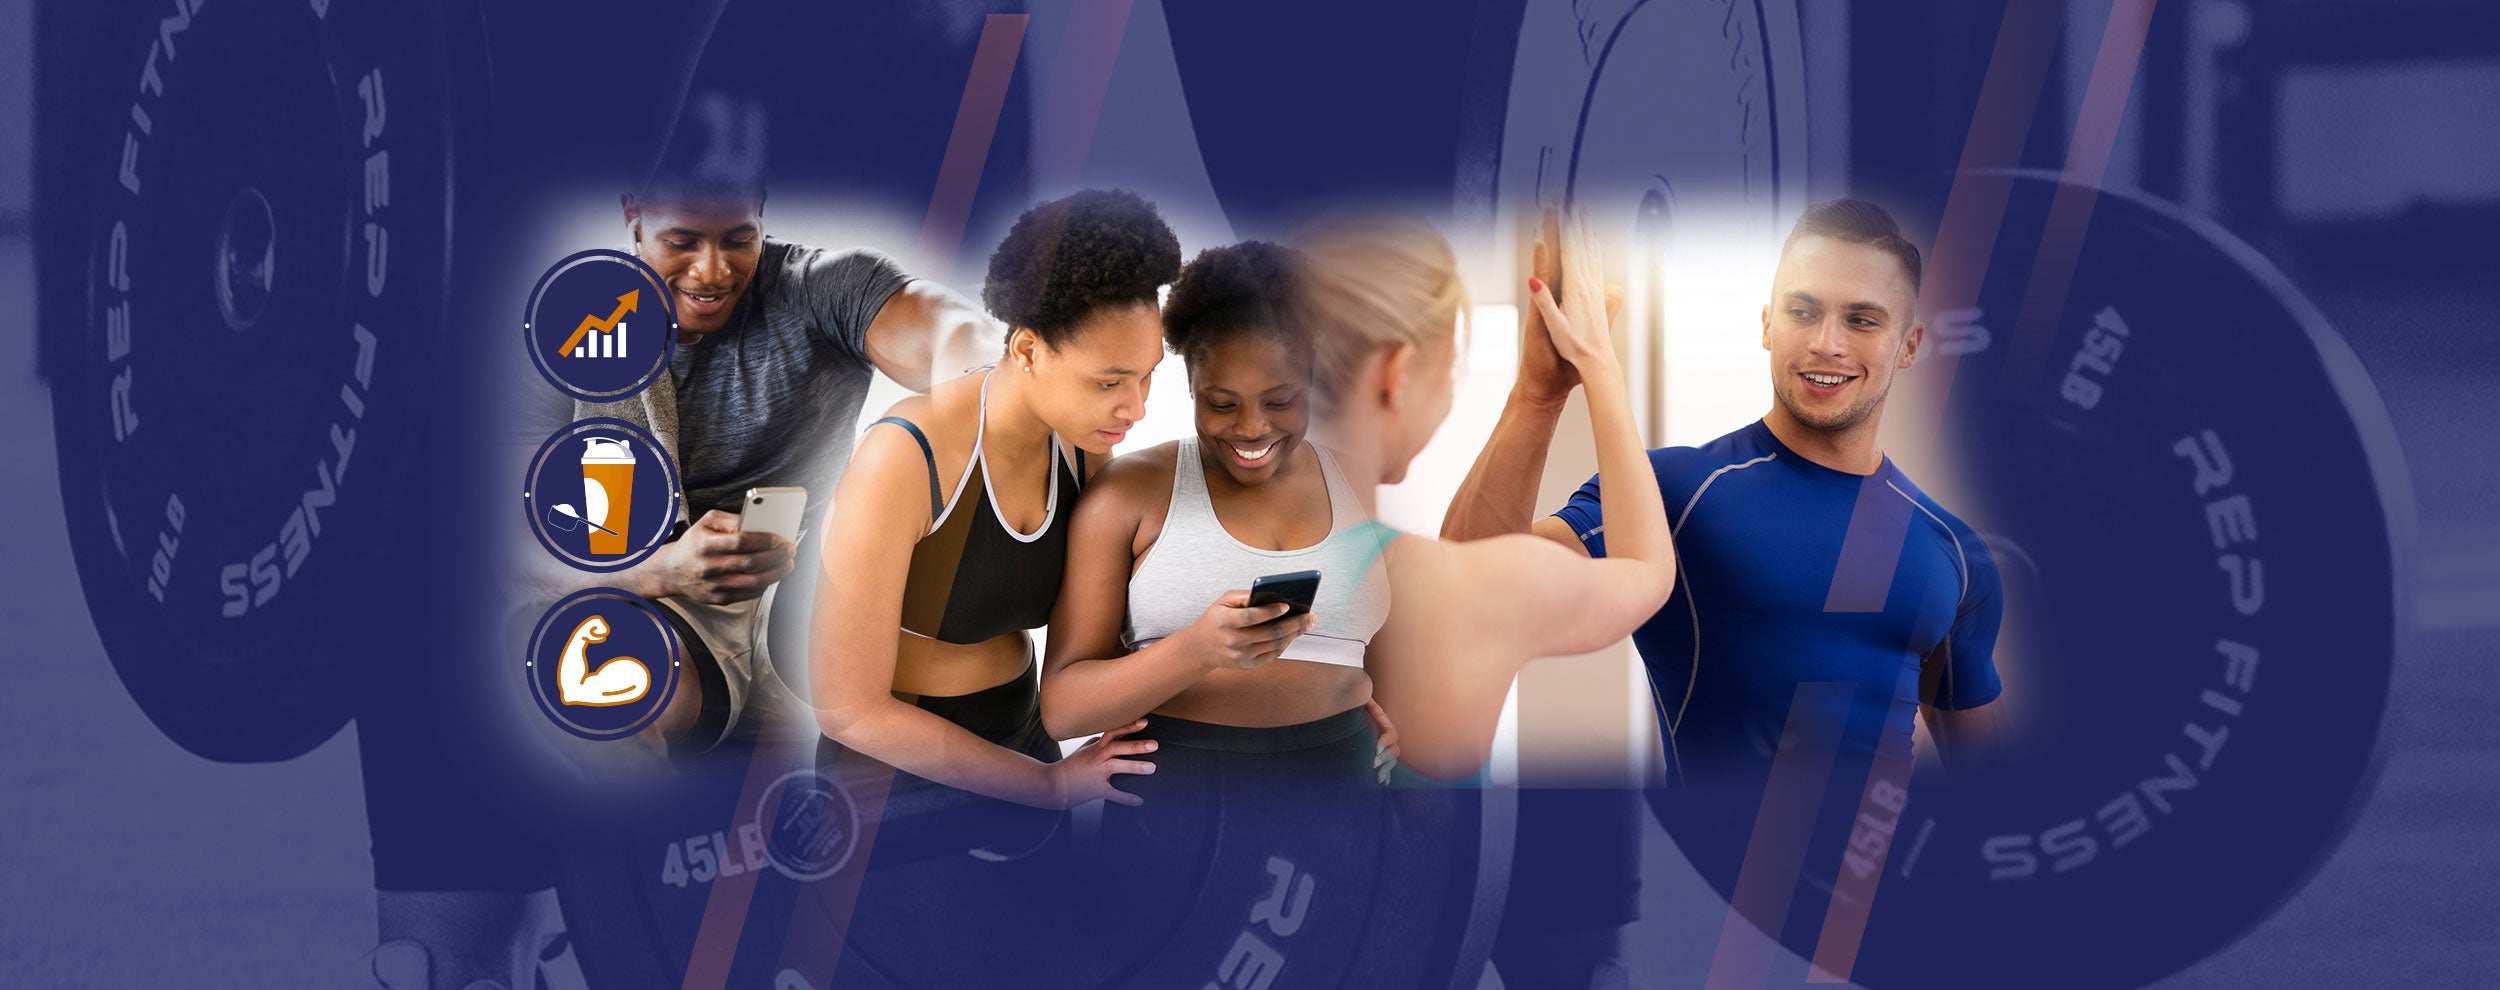 Brand Ambassadors using fitness app, highlighting Pro-Fit's residual income opportunity.